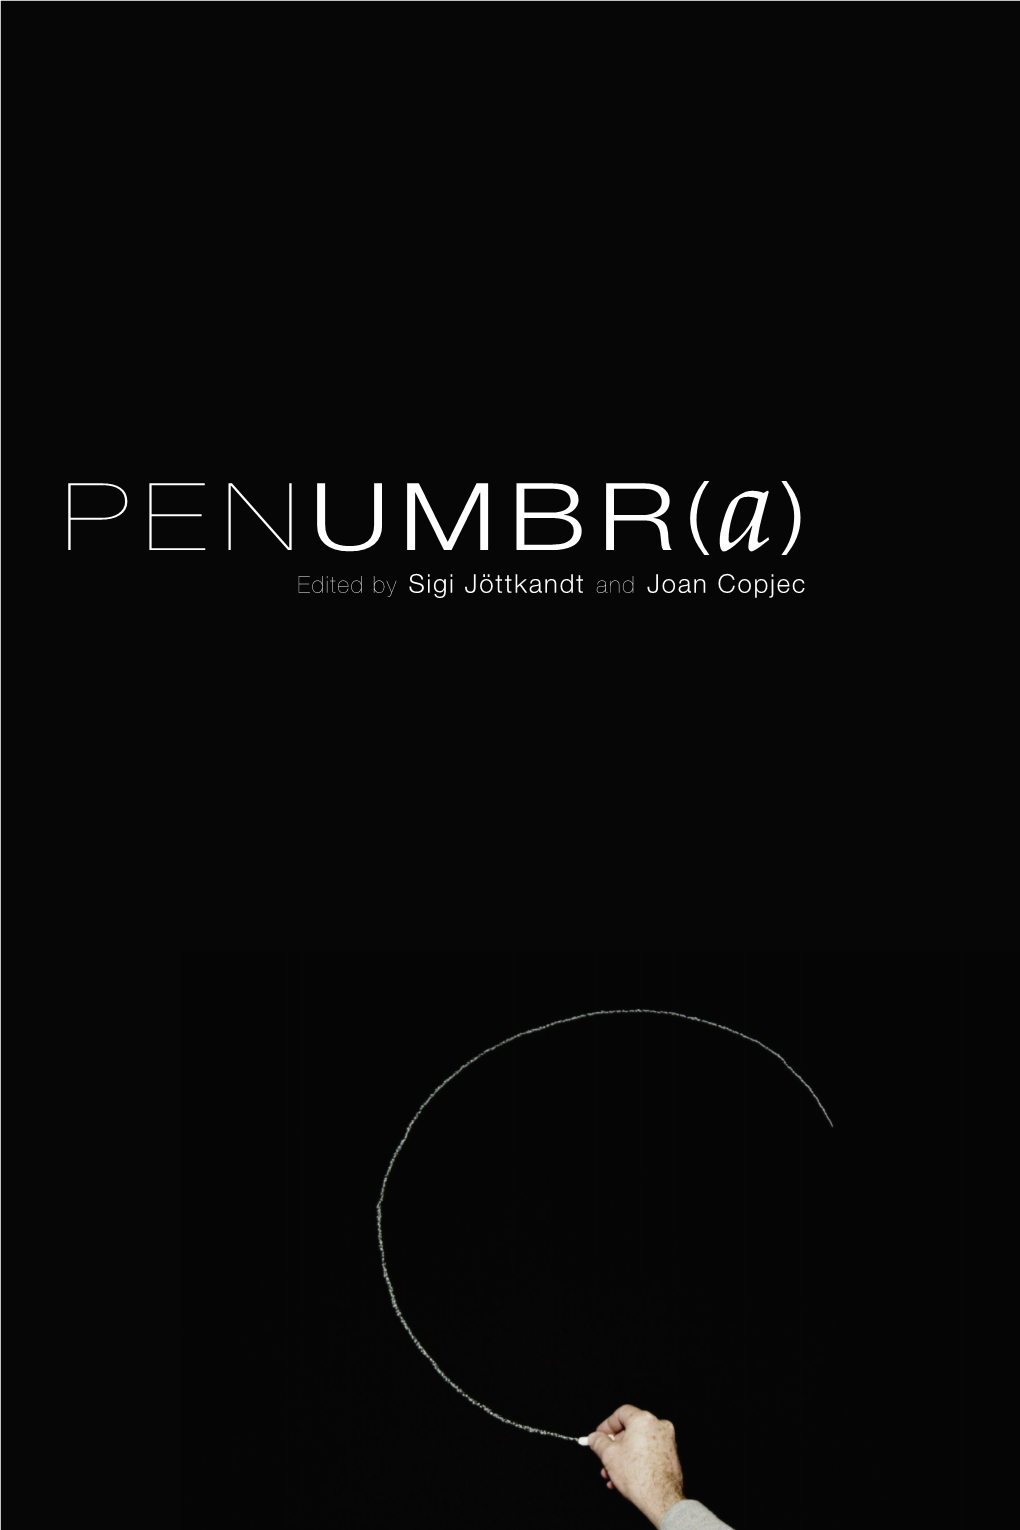 Penumbra Anamnesis Anamnesis Means Remembrance Or Reminiscence, the Collection and Re- Collection of What Has Been Lost, Forgotten, Or Effaced